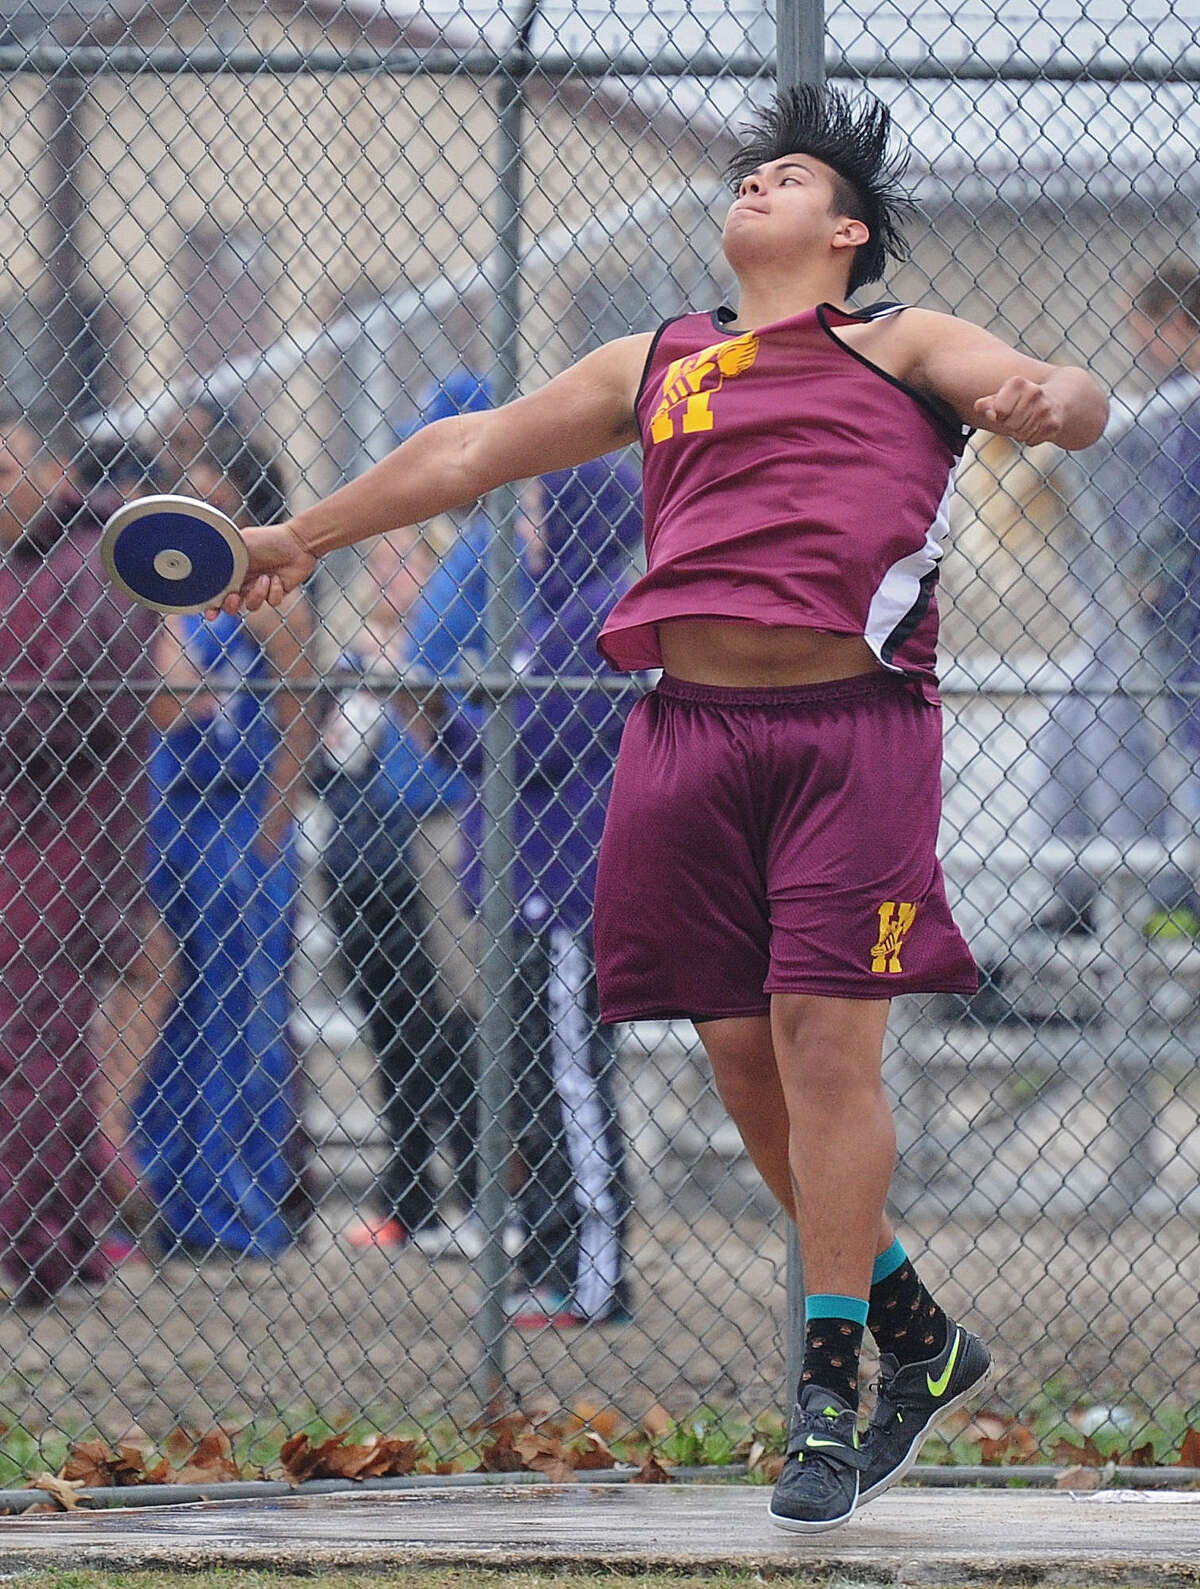 Andres Garcia of Harlandale hurls the discus at the District 29/30-4A meet April 16 at Gregory-Portland. He won second with a 152-9 distance. He also took first in the shot put with 54-6. Both of those distances are season-bests for Garcia.